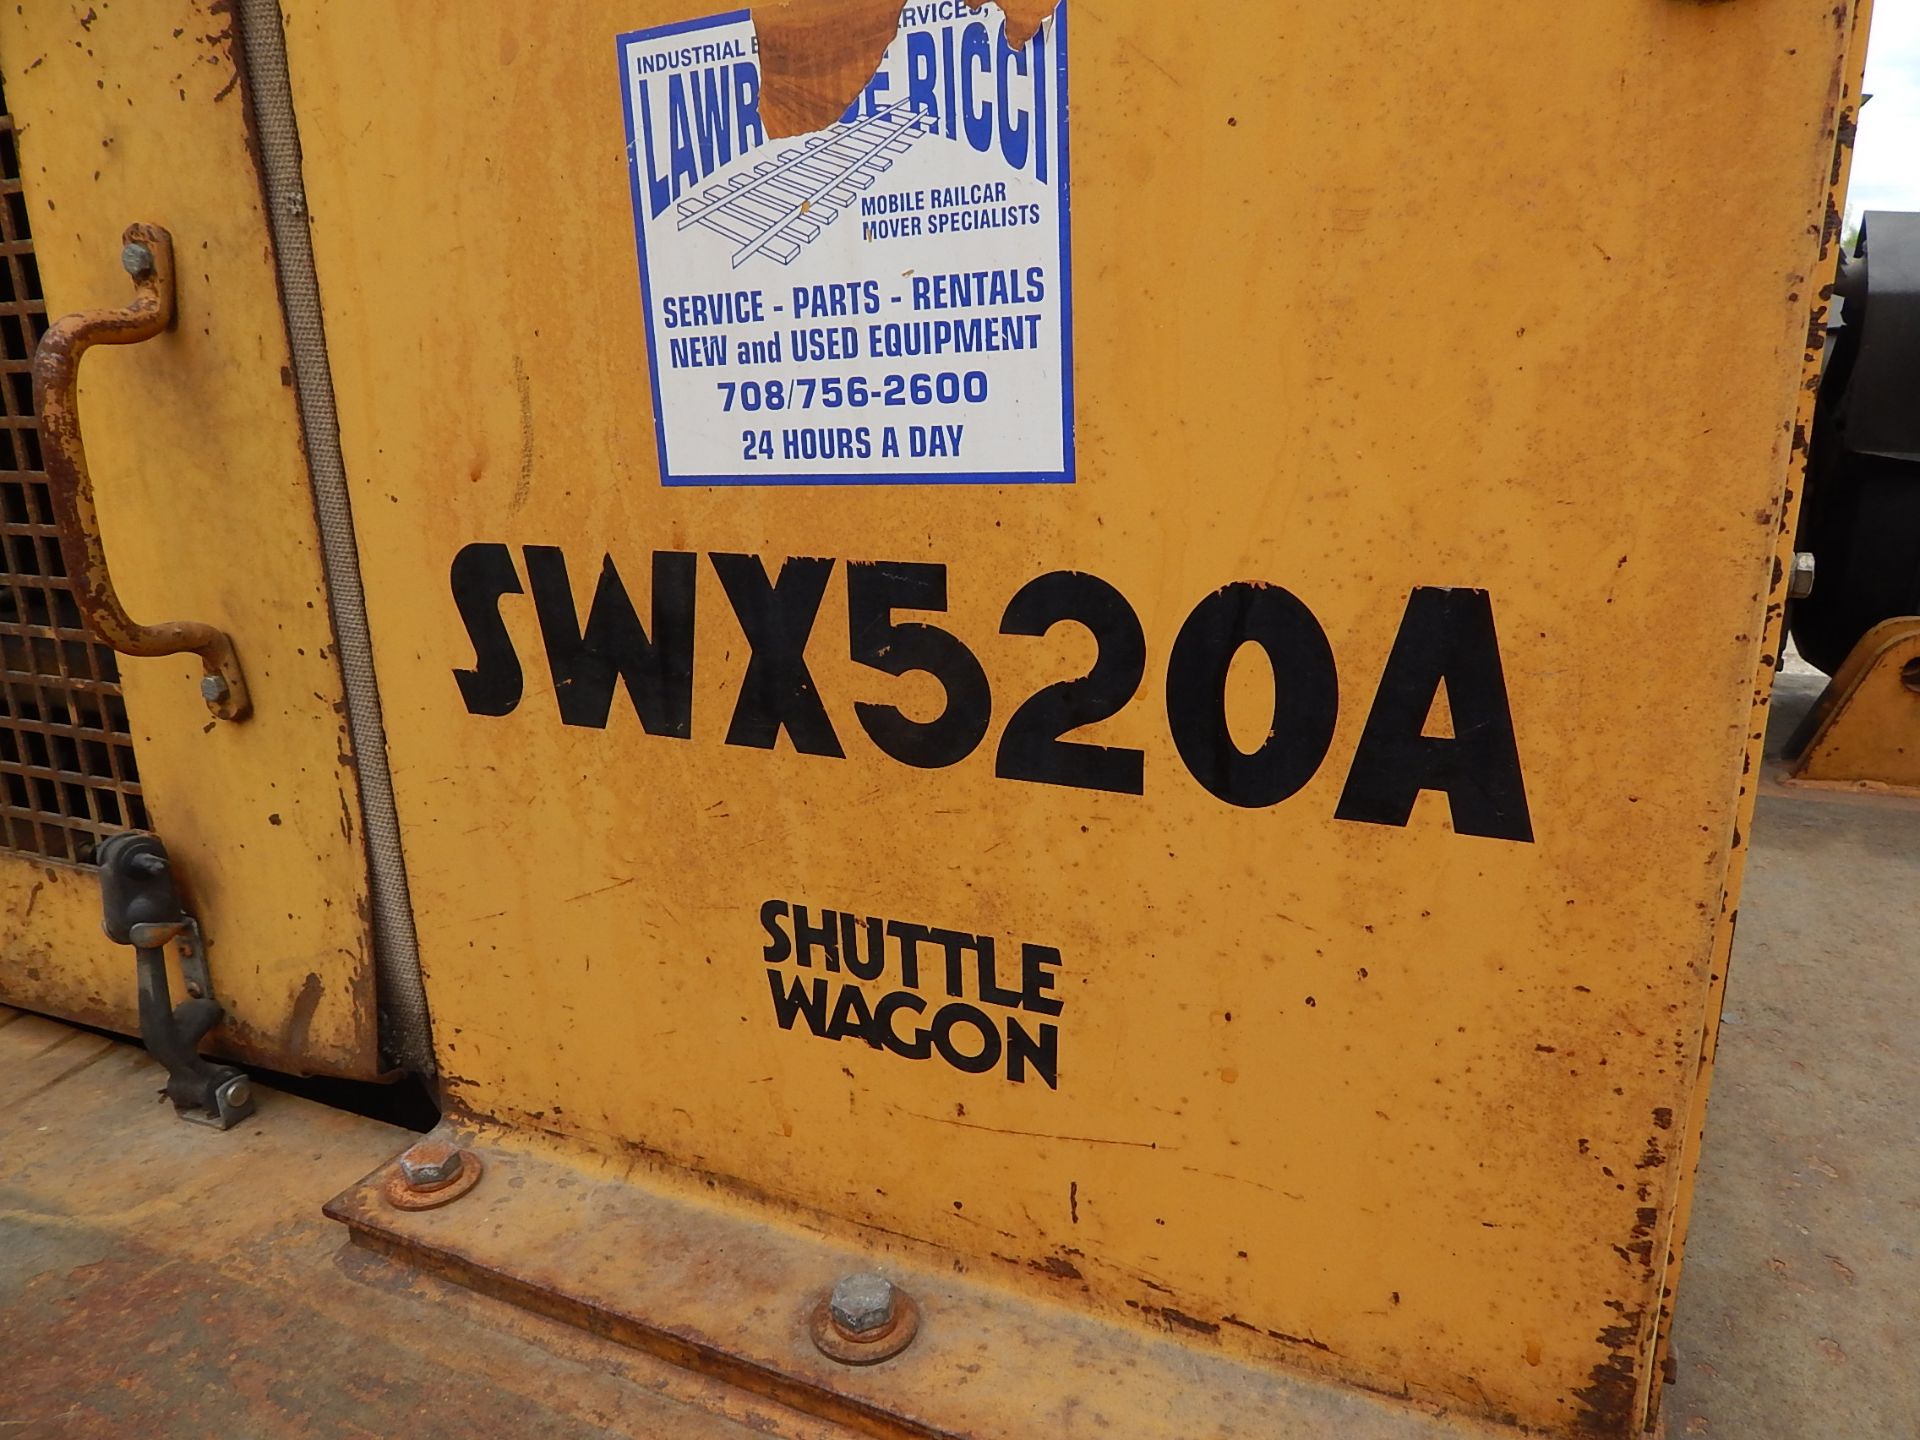 Shuttlewagon Series 500 Railcar Mover, Model SWX520A, 32,000 lb. Draw Bar Pull, 215 HP, 4-Speed - Image 16 of 27